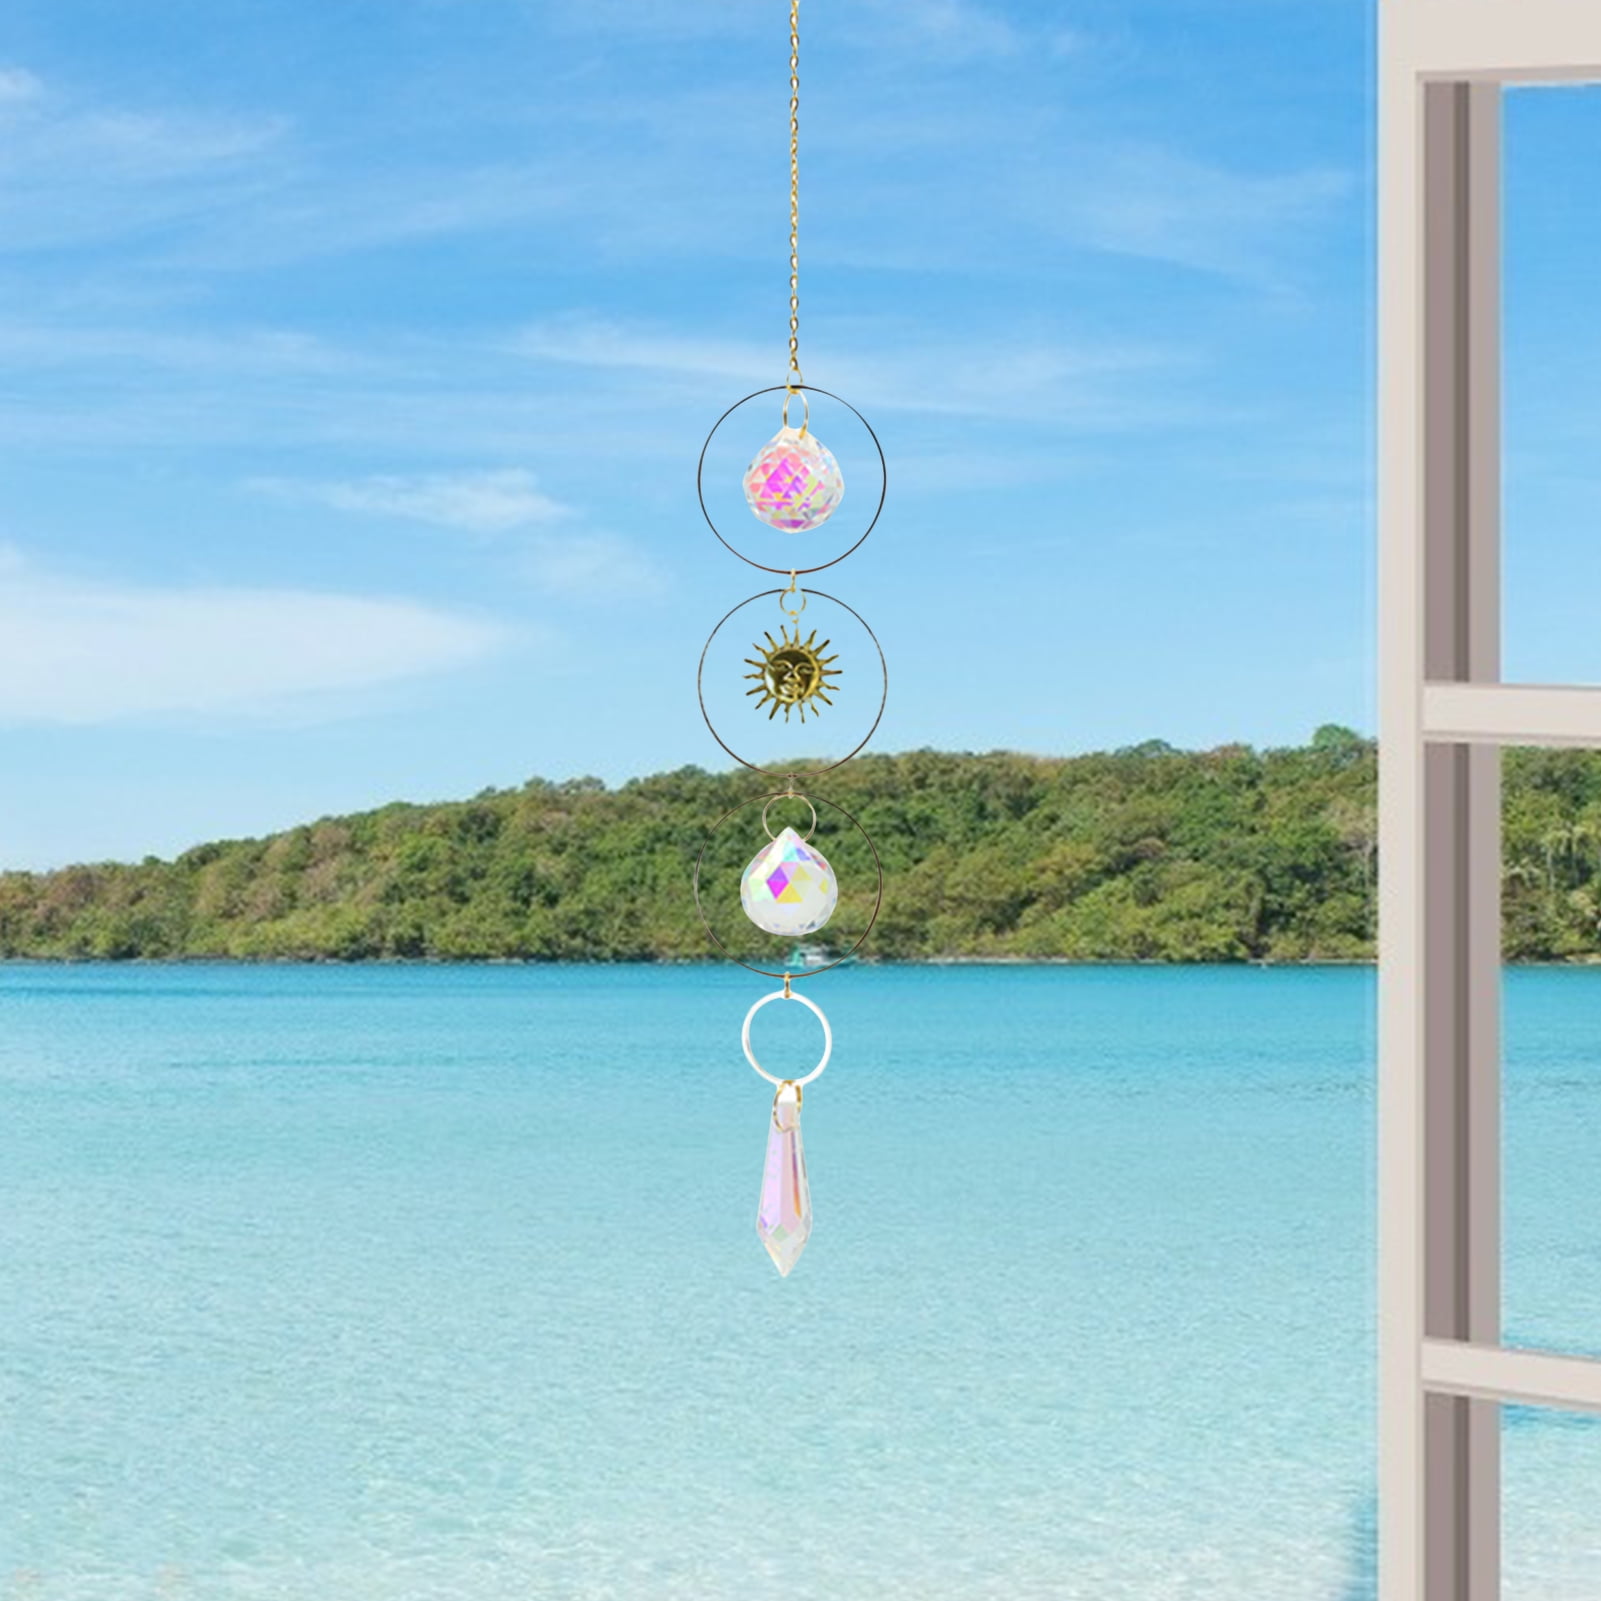 Details about     Crystal Ball Prisms Feng Shui Home Window Pendant Rainbow Maker 